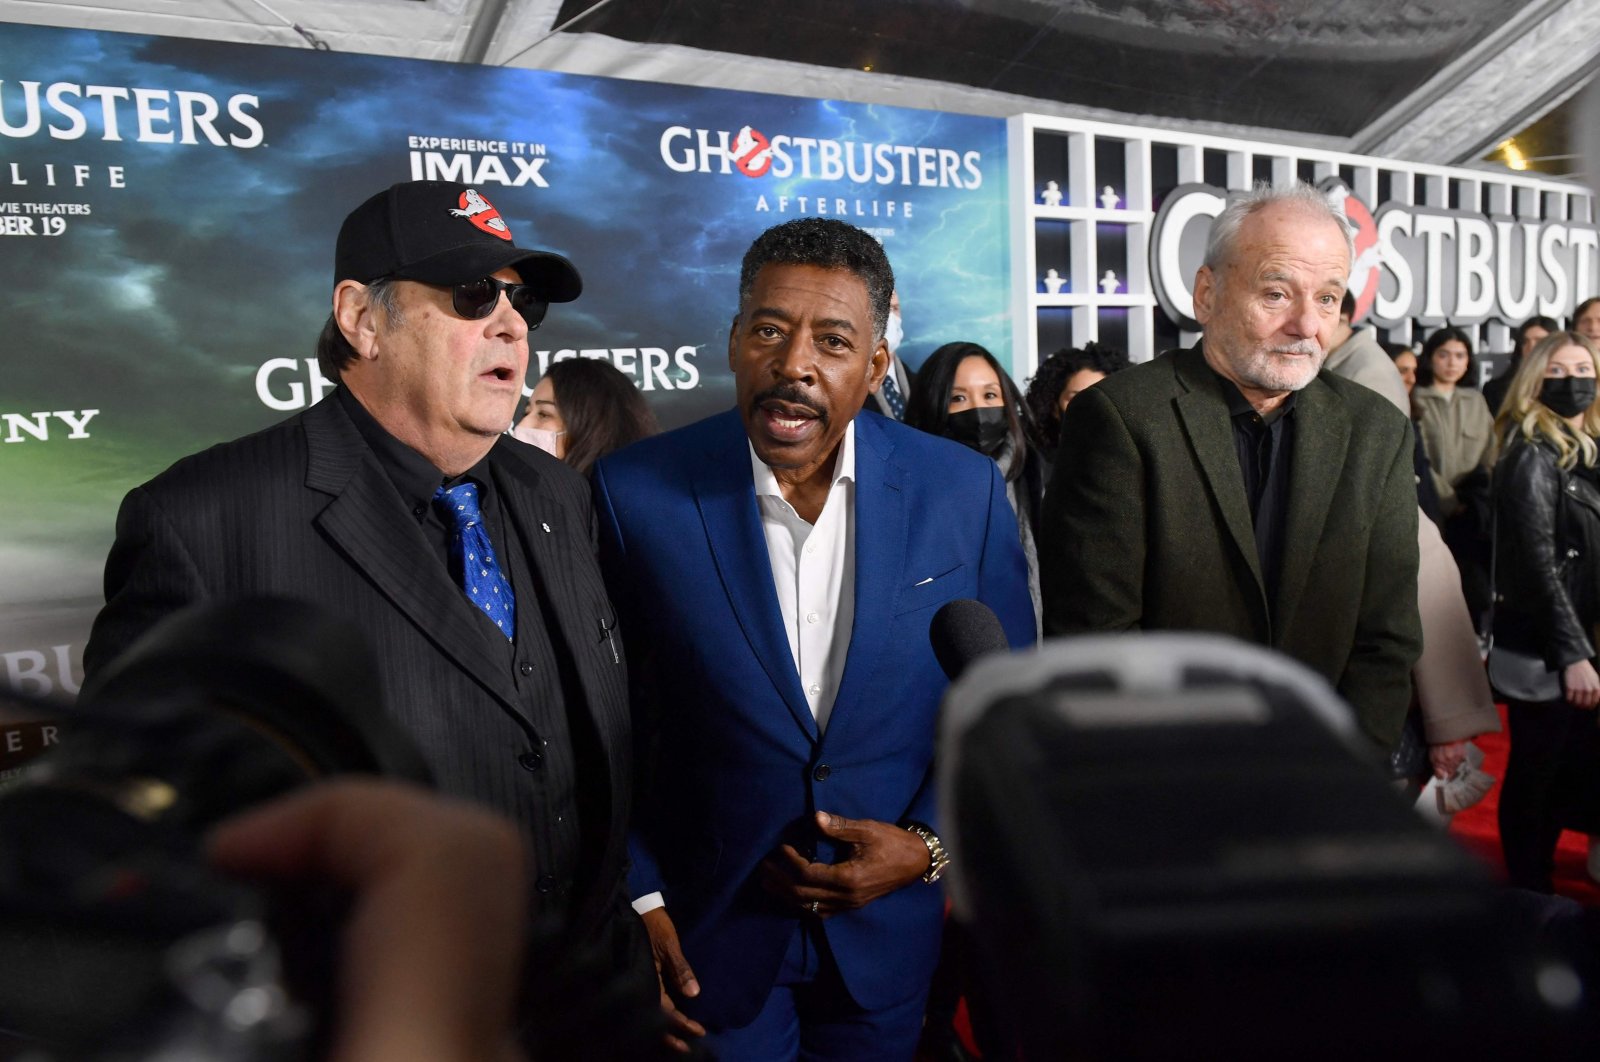 Actors Bill Murray (R), Ernie Hudson (C) and Dan Aykroyd attend the &quot;Ghostbusters: Afterlife&quot; New York premiere at AMC Lincoln Square, in New York City, U.S., Nov. 15, 2021. (AFP Photo)